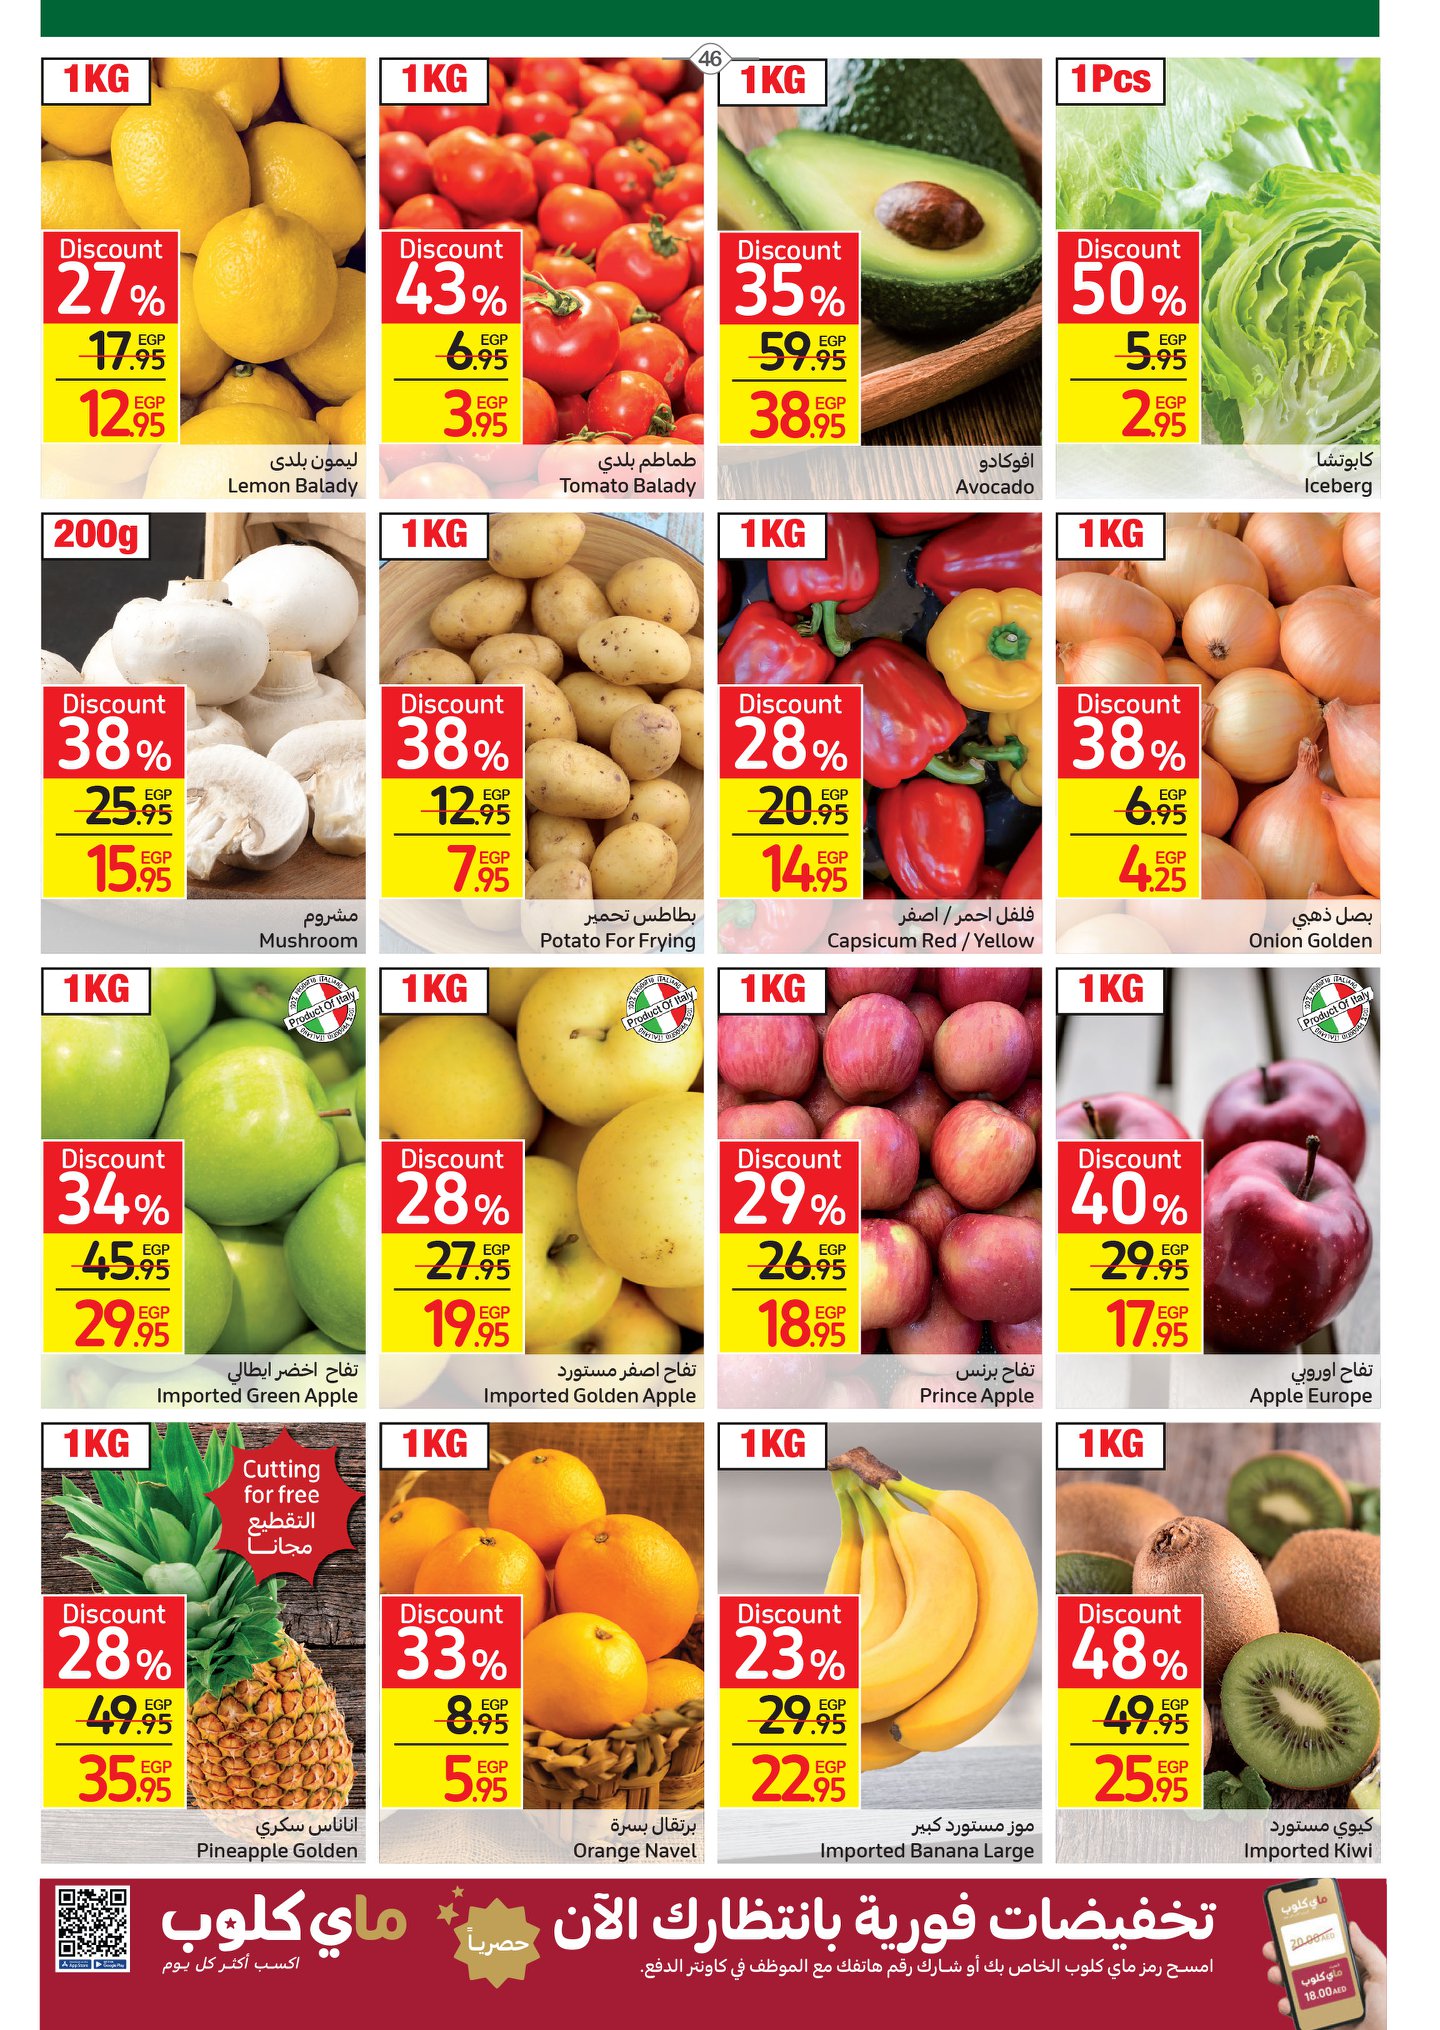 Carrefour magazine offers complete with 50% discounts and a surprise purchase in convenient installments without interest 52